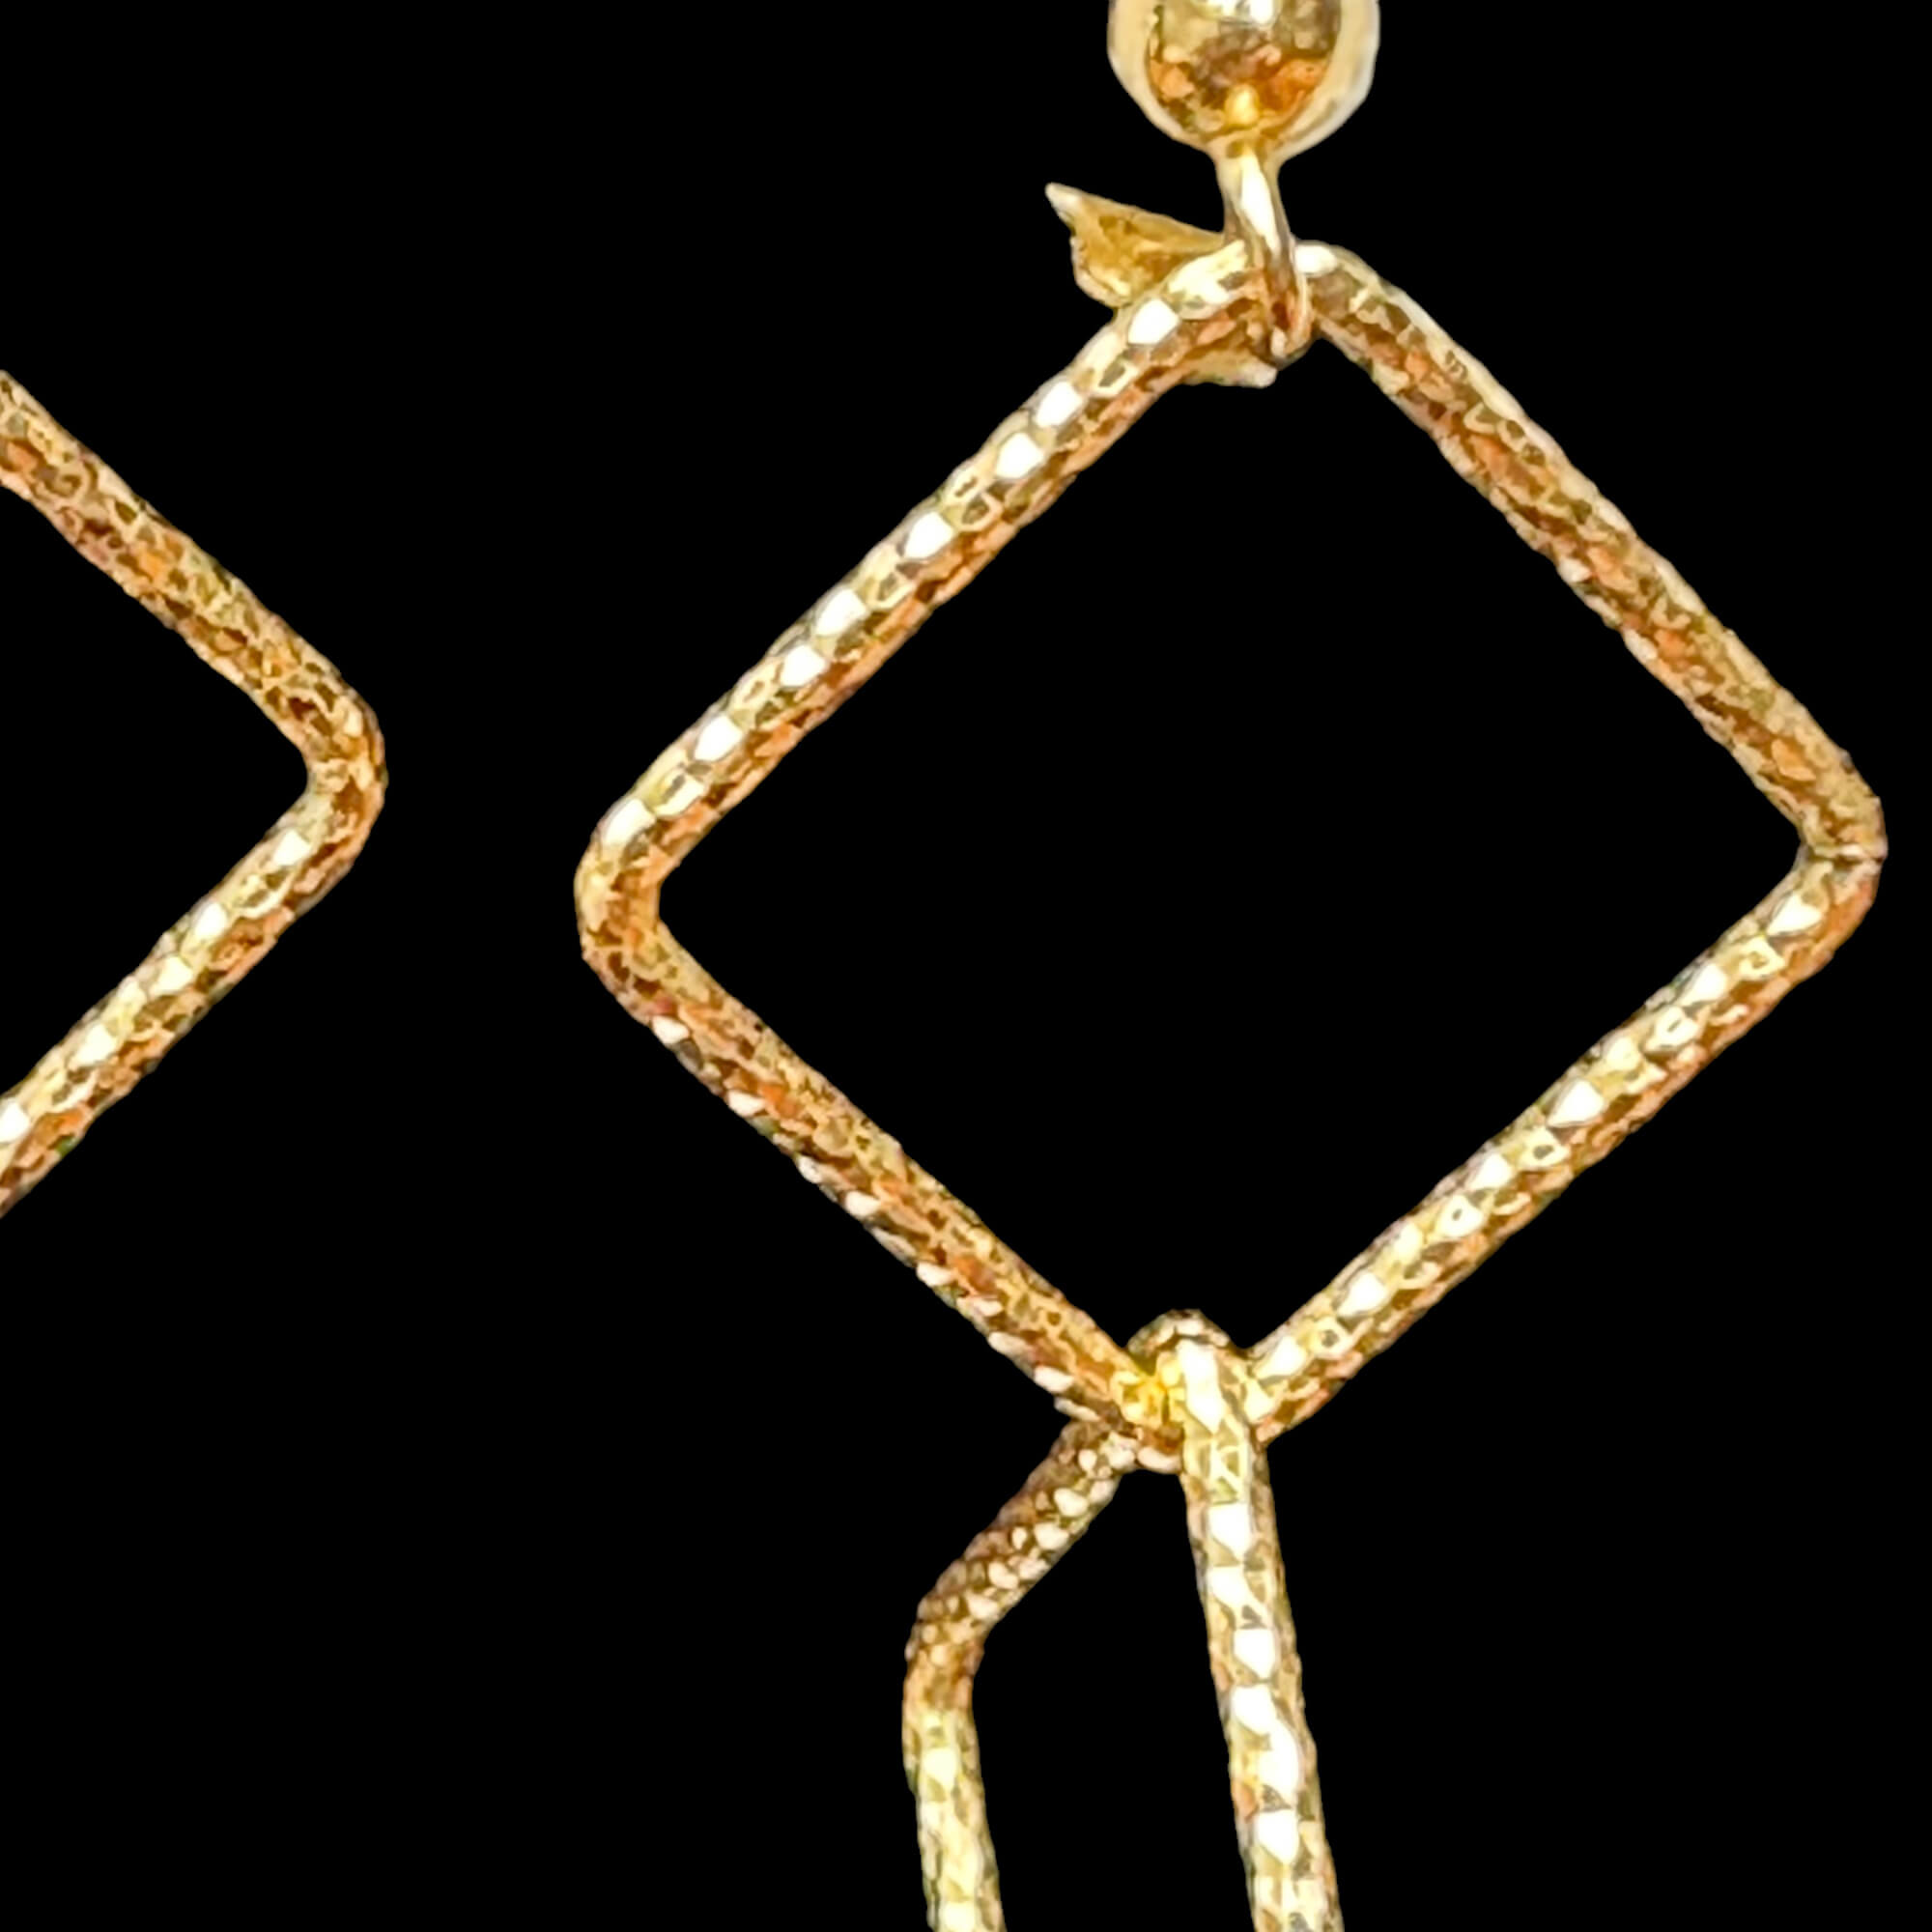 Gilded earrings with two open squares